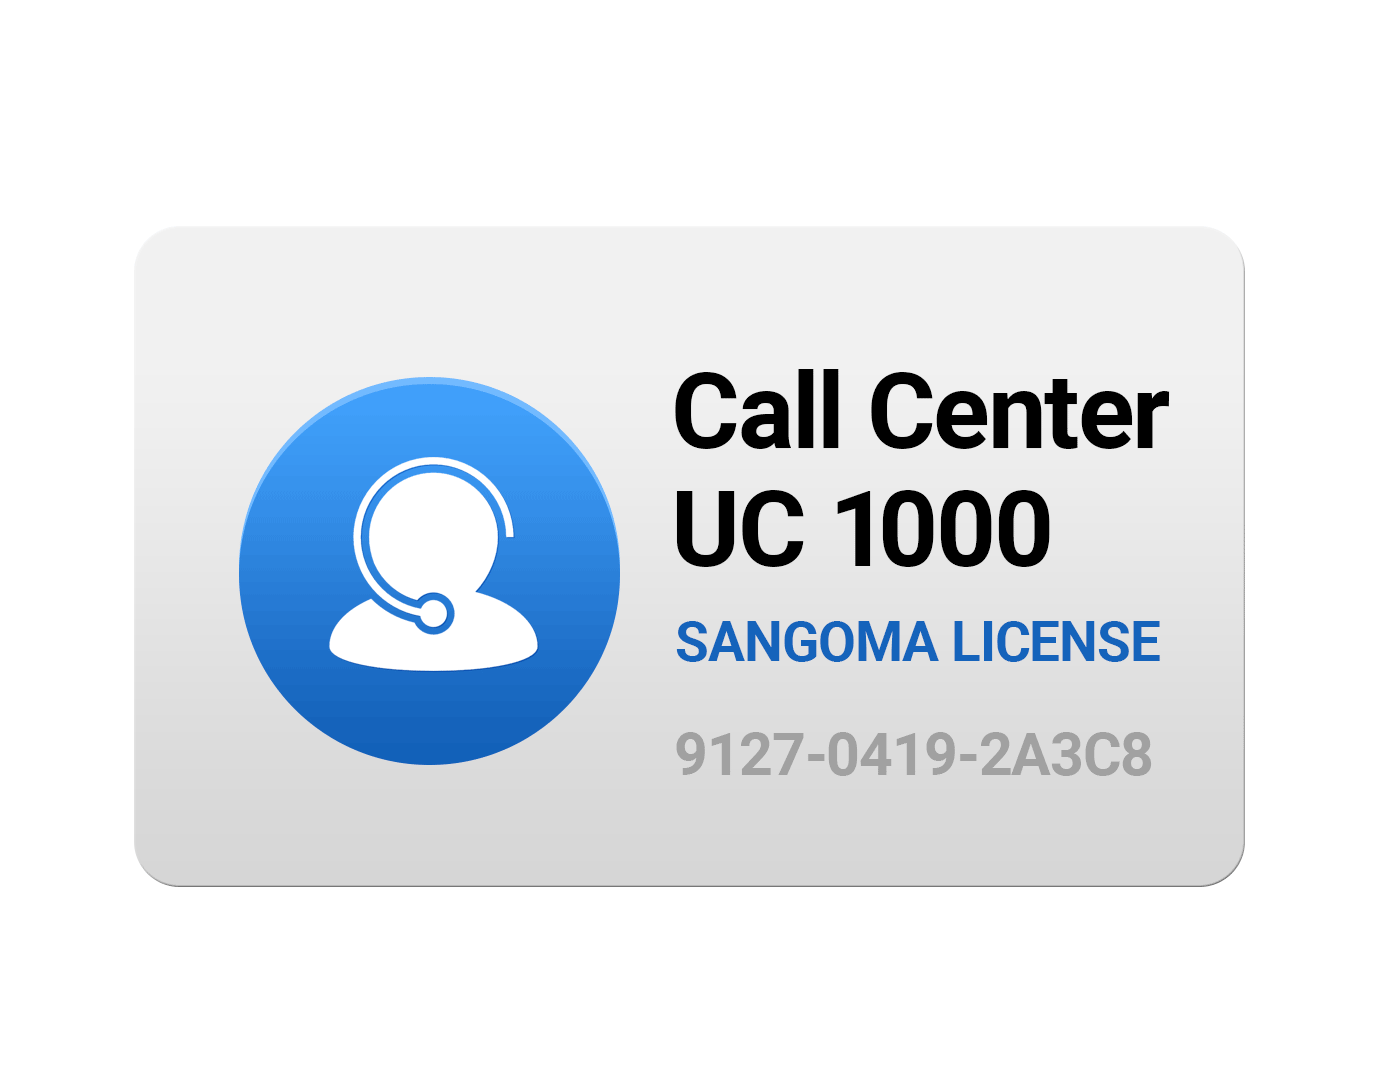 Call Center Features License for UC 1000